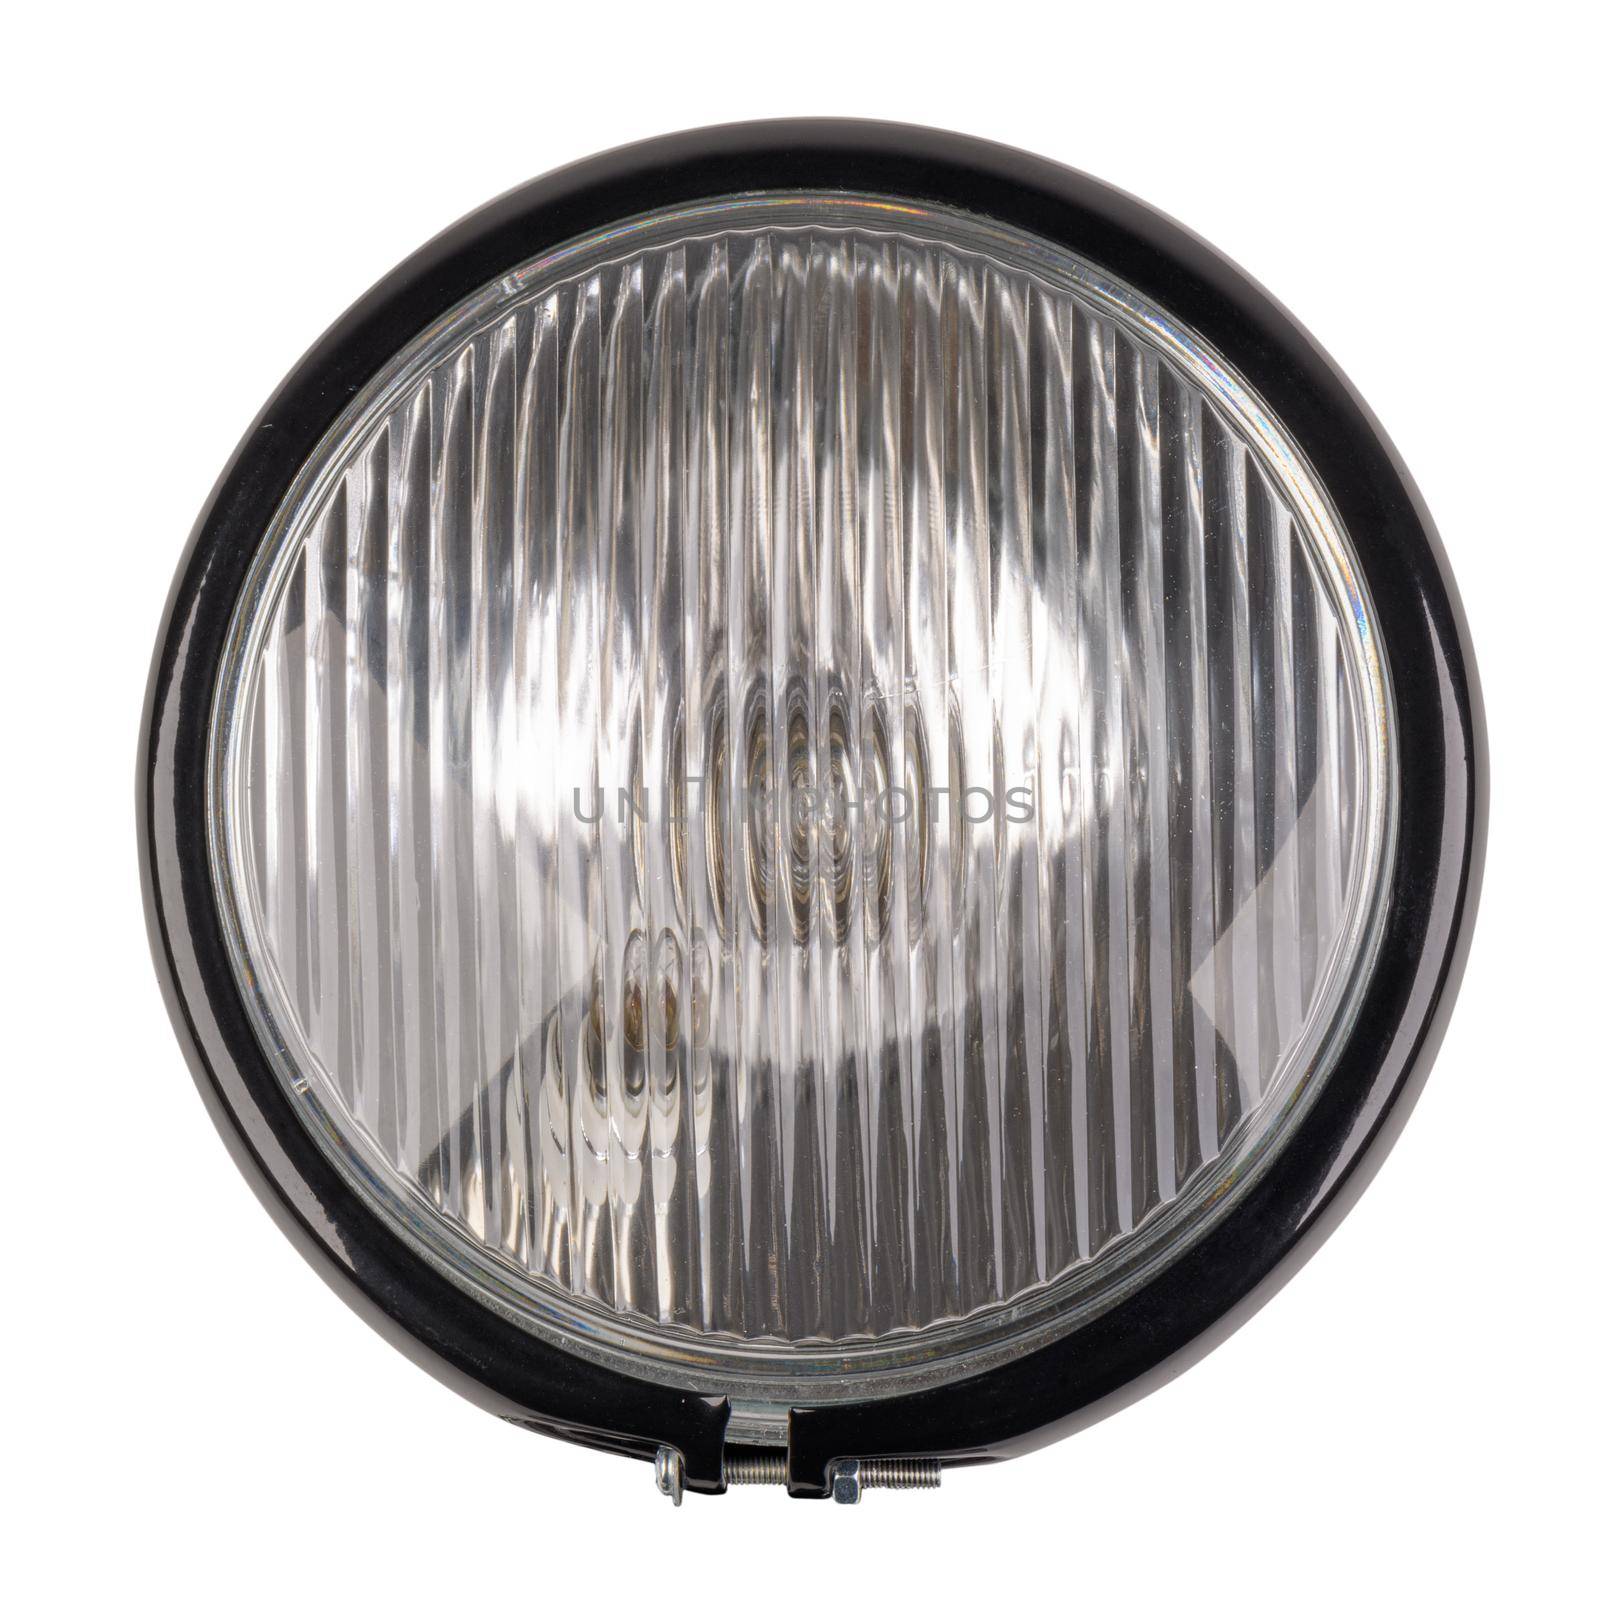 Close-up motorcycle headlight isolated in a white background.